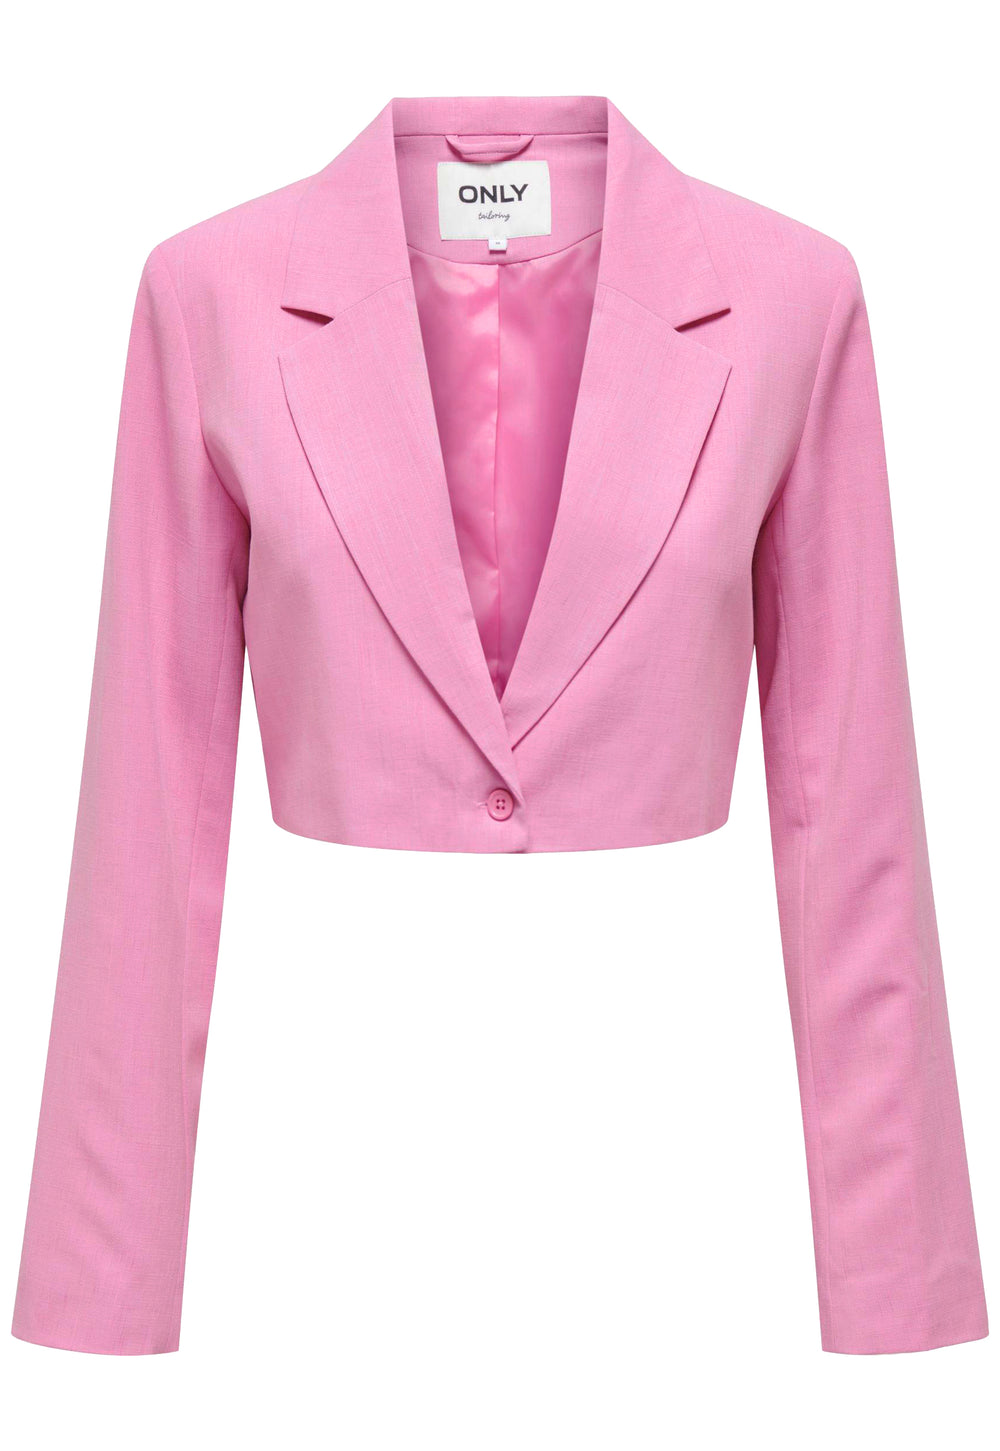 ONLY Brigitta Cropped Suit Co-ord Blazer in Pink | One Nation Clothing ...